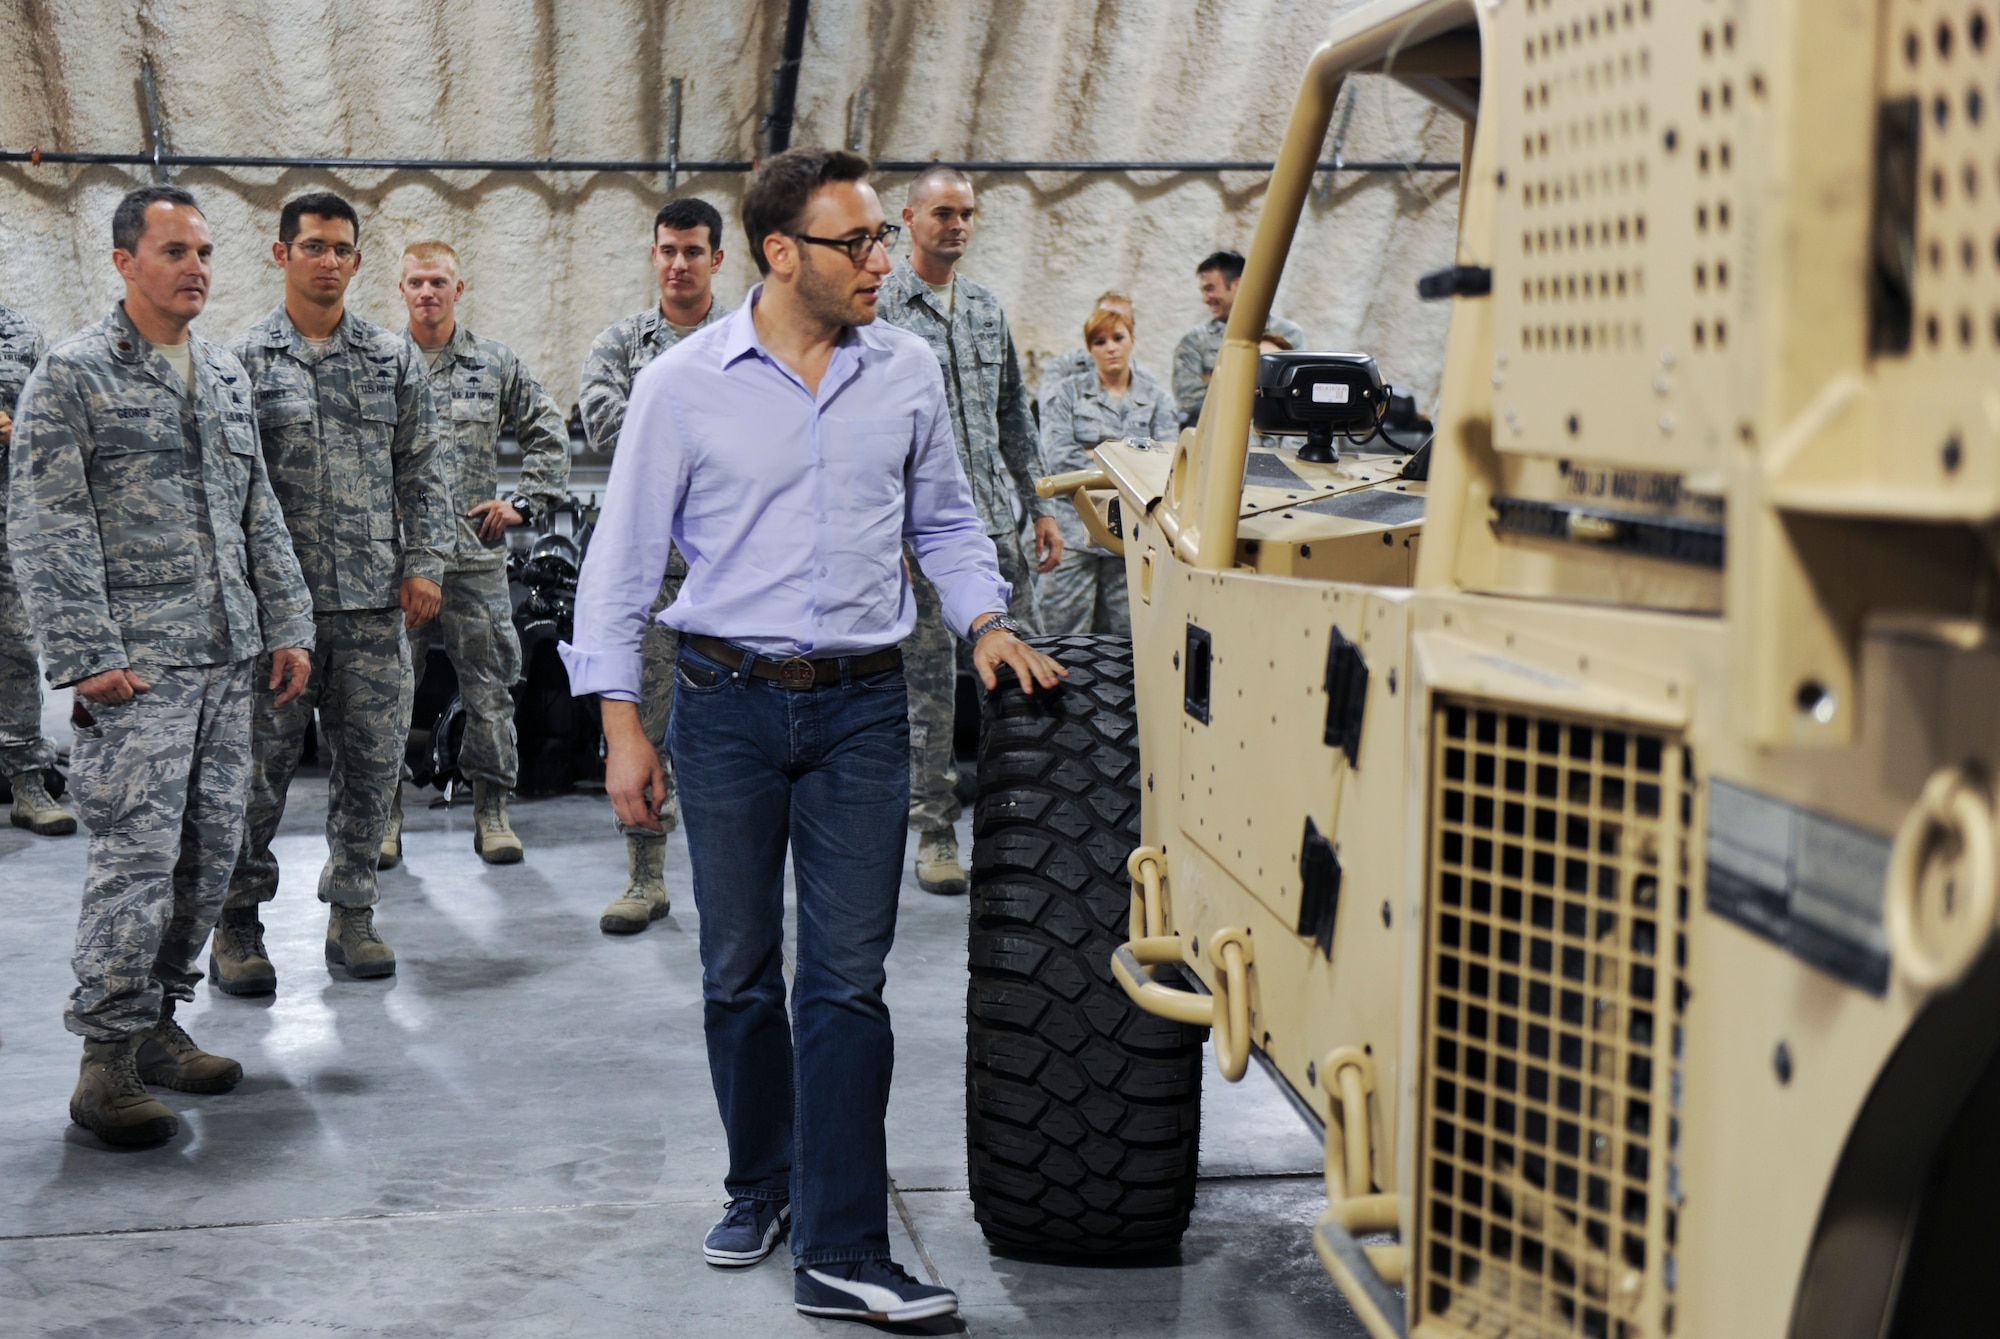 Simon Sinek, an internationally renowned speaker and author, looks inside of a Guardian Angel Air-Deployable Rescue Vehicle while visiting the 58th Rescue Squadron at Nellis Air Force Base, Nev., Oct. 1, 2014. The GAARV is a multi-purpose utility vehicle intended to help combat search and rescue teams retrieve individuals who have been isolated. (U.S. Air Force photo by Airman 1st Class Mikaley Towle)